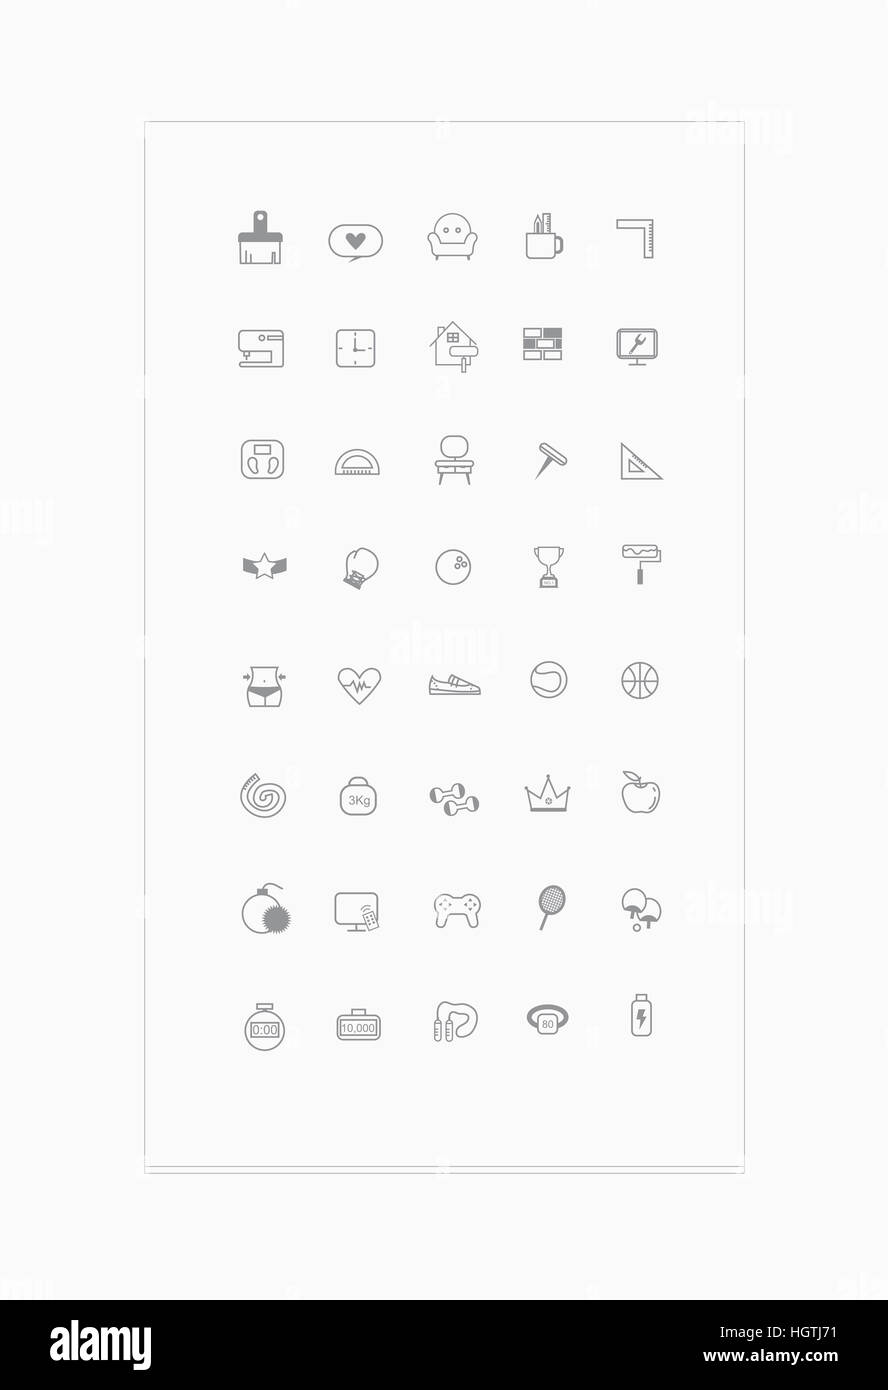 Set of various line icons Stock Photo